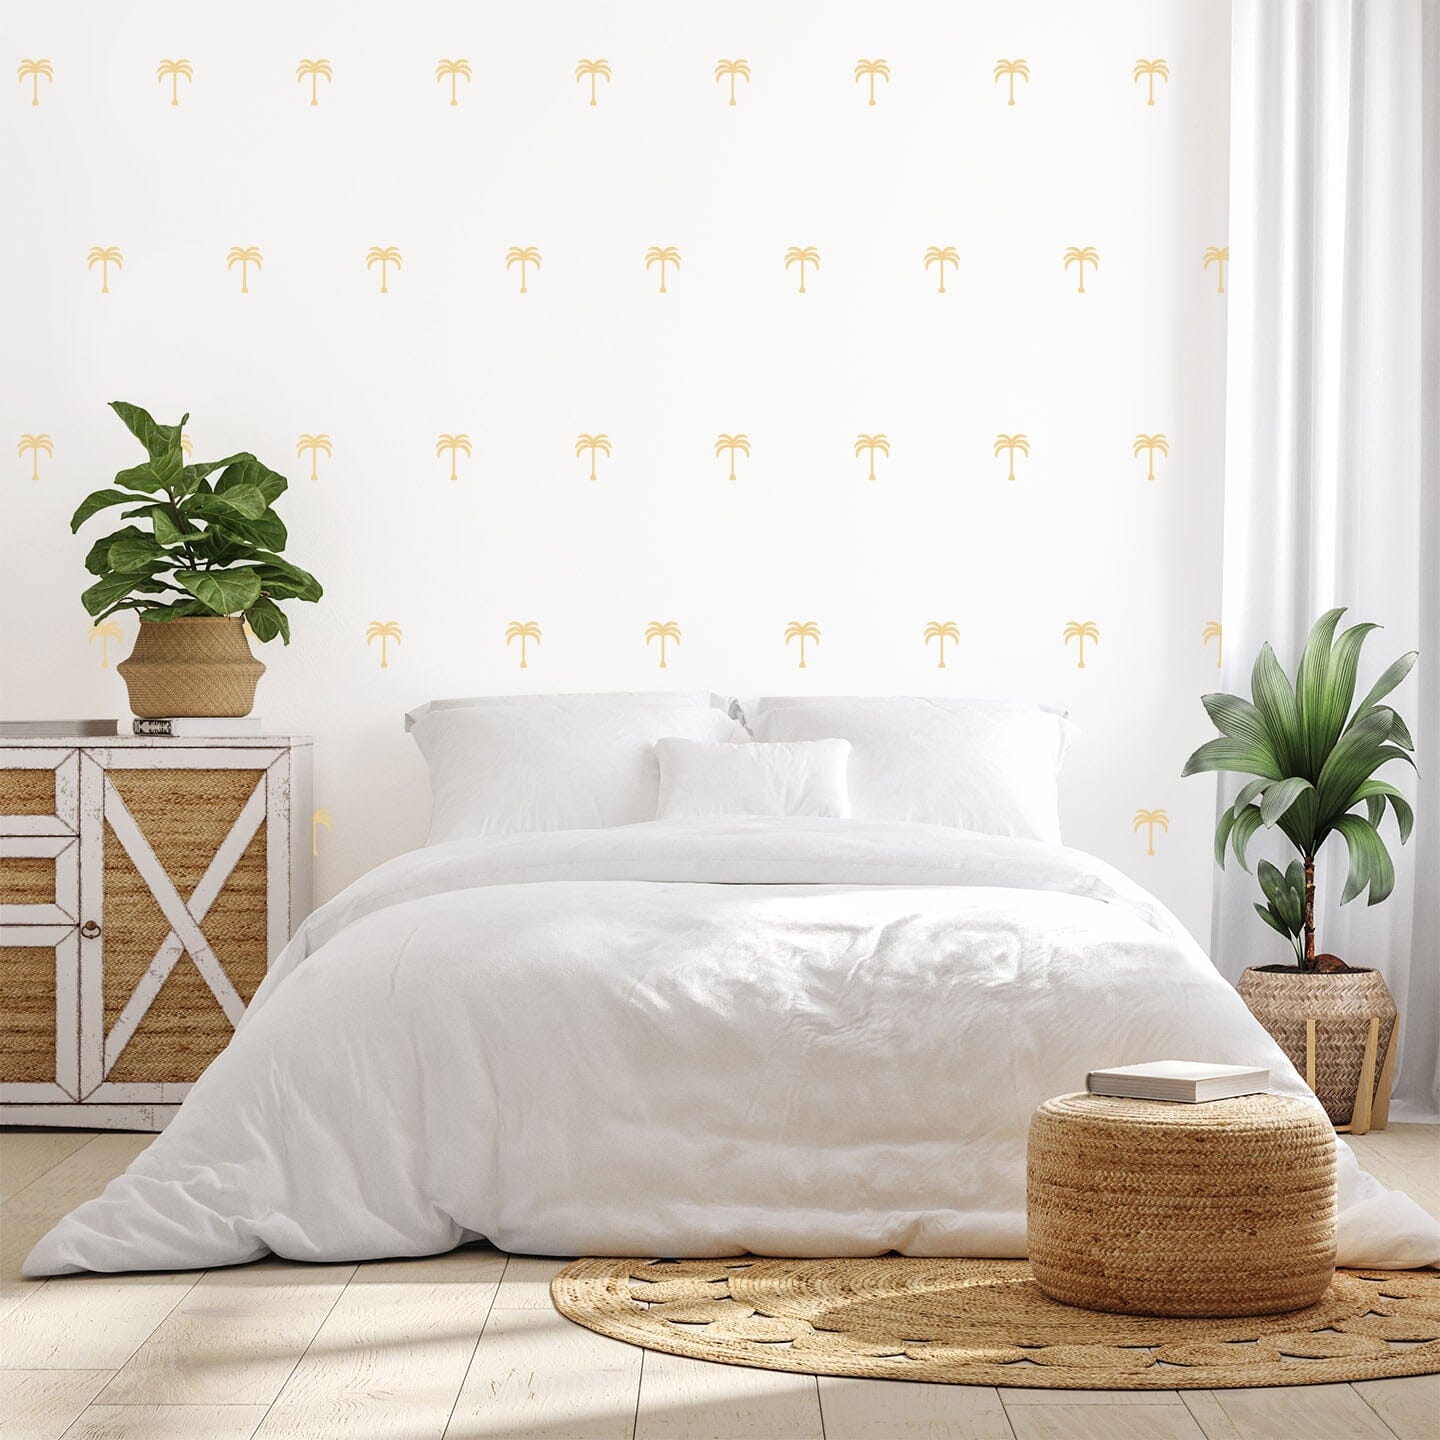 Palm Tree Wall Decals Decals Urbanwalls Maize 